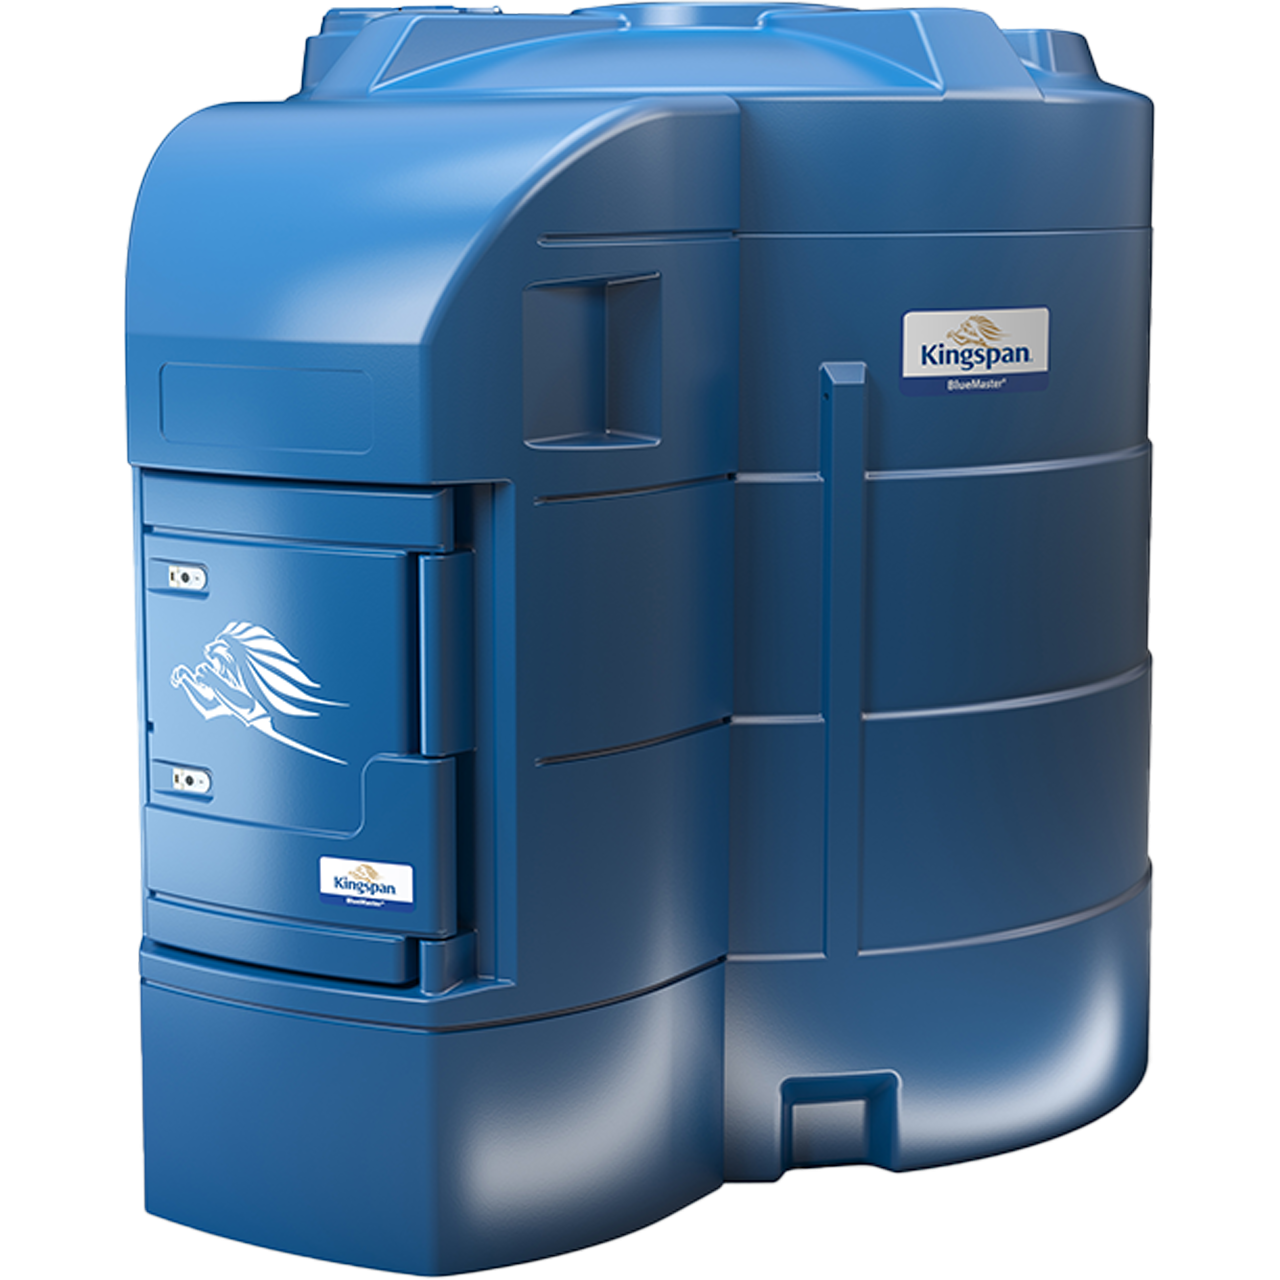 Tank system for AUS 32 (AdBlue®) – CEMO: capacity 200 l, with